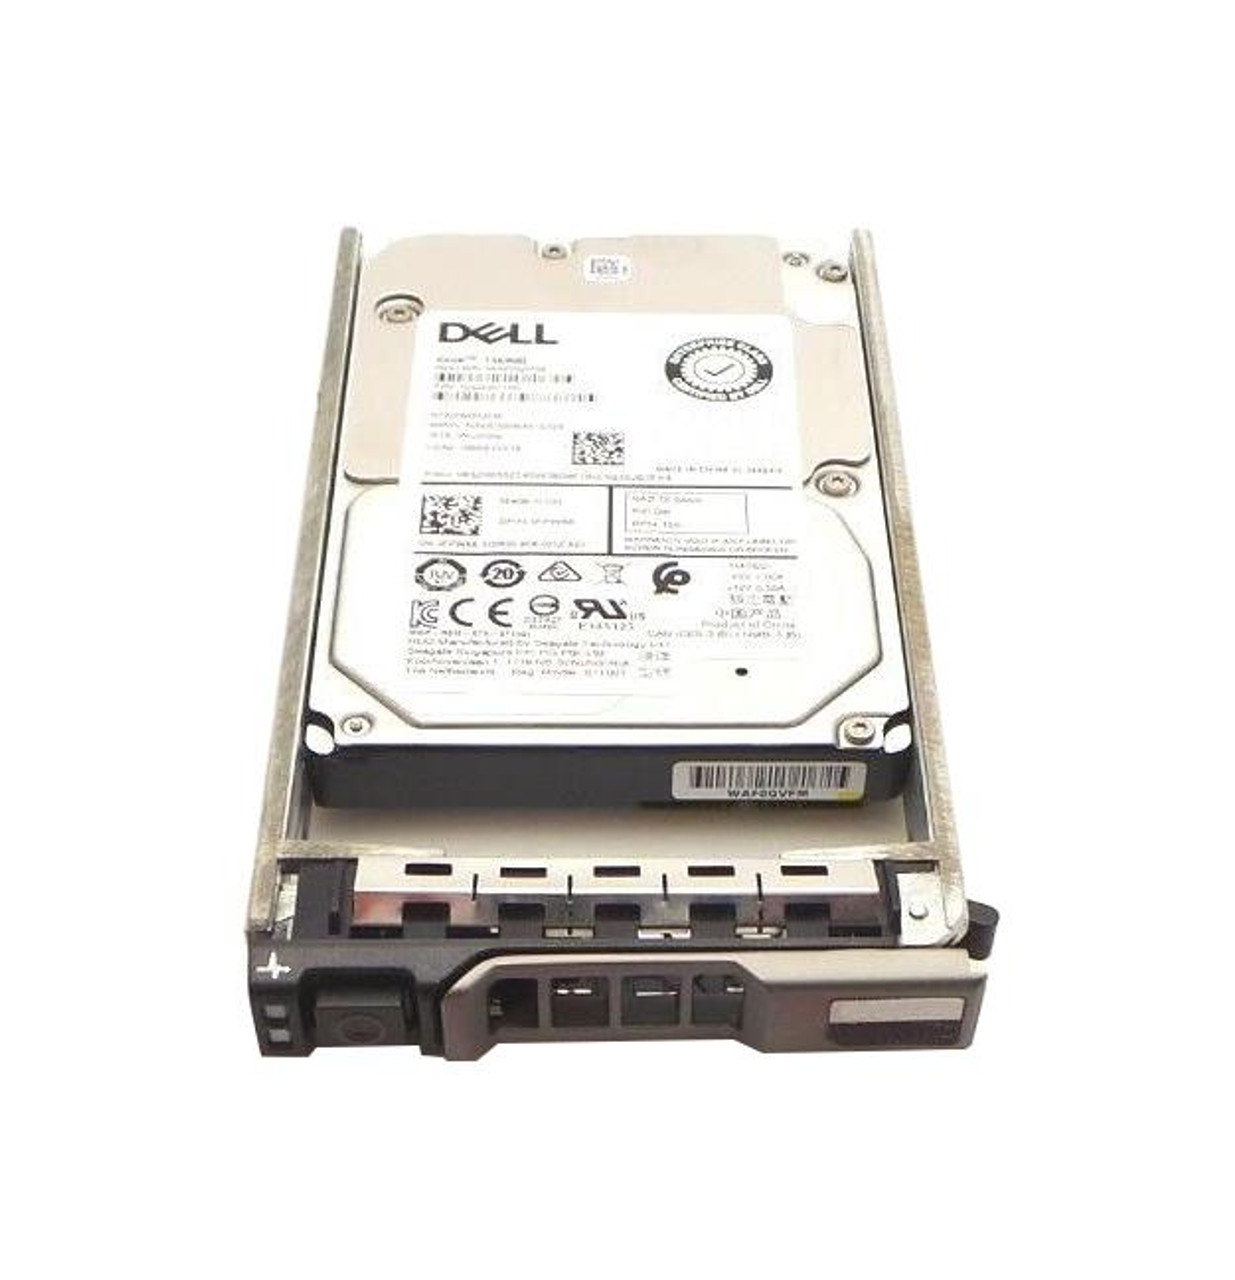 400-AJPR Dell 300GB 10000RPM SAS 12Gbps Dual Port 2.5-inch Internal Hard Drive with Tray